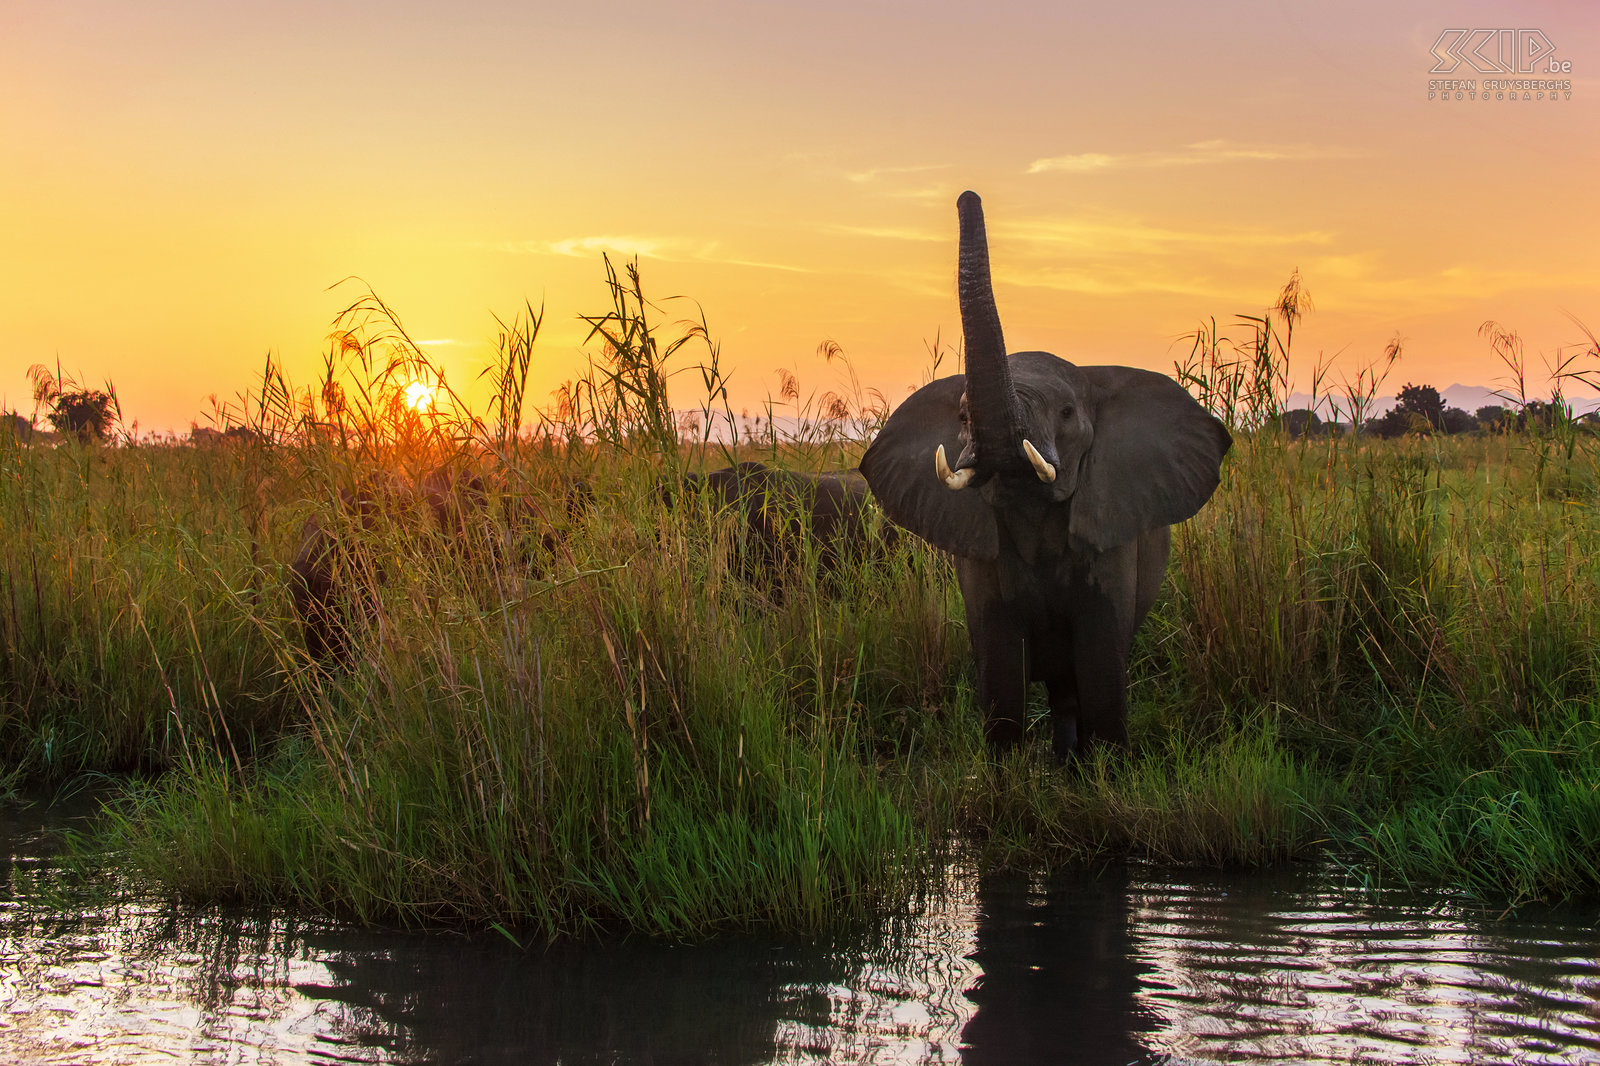 Lower Zambezi - Elephant at sunset At sunset on the river was wonderful and we saw a group of elephants at the riverside drinking water. Stefan Cruysberghs